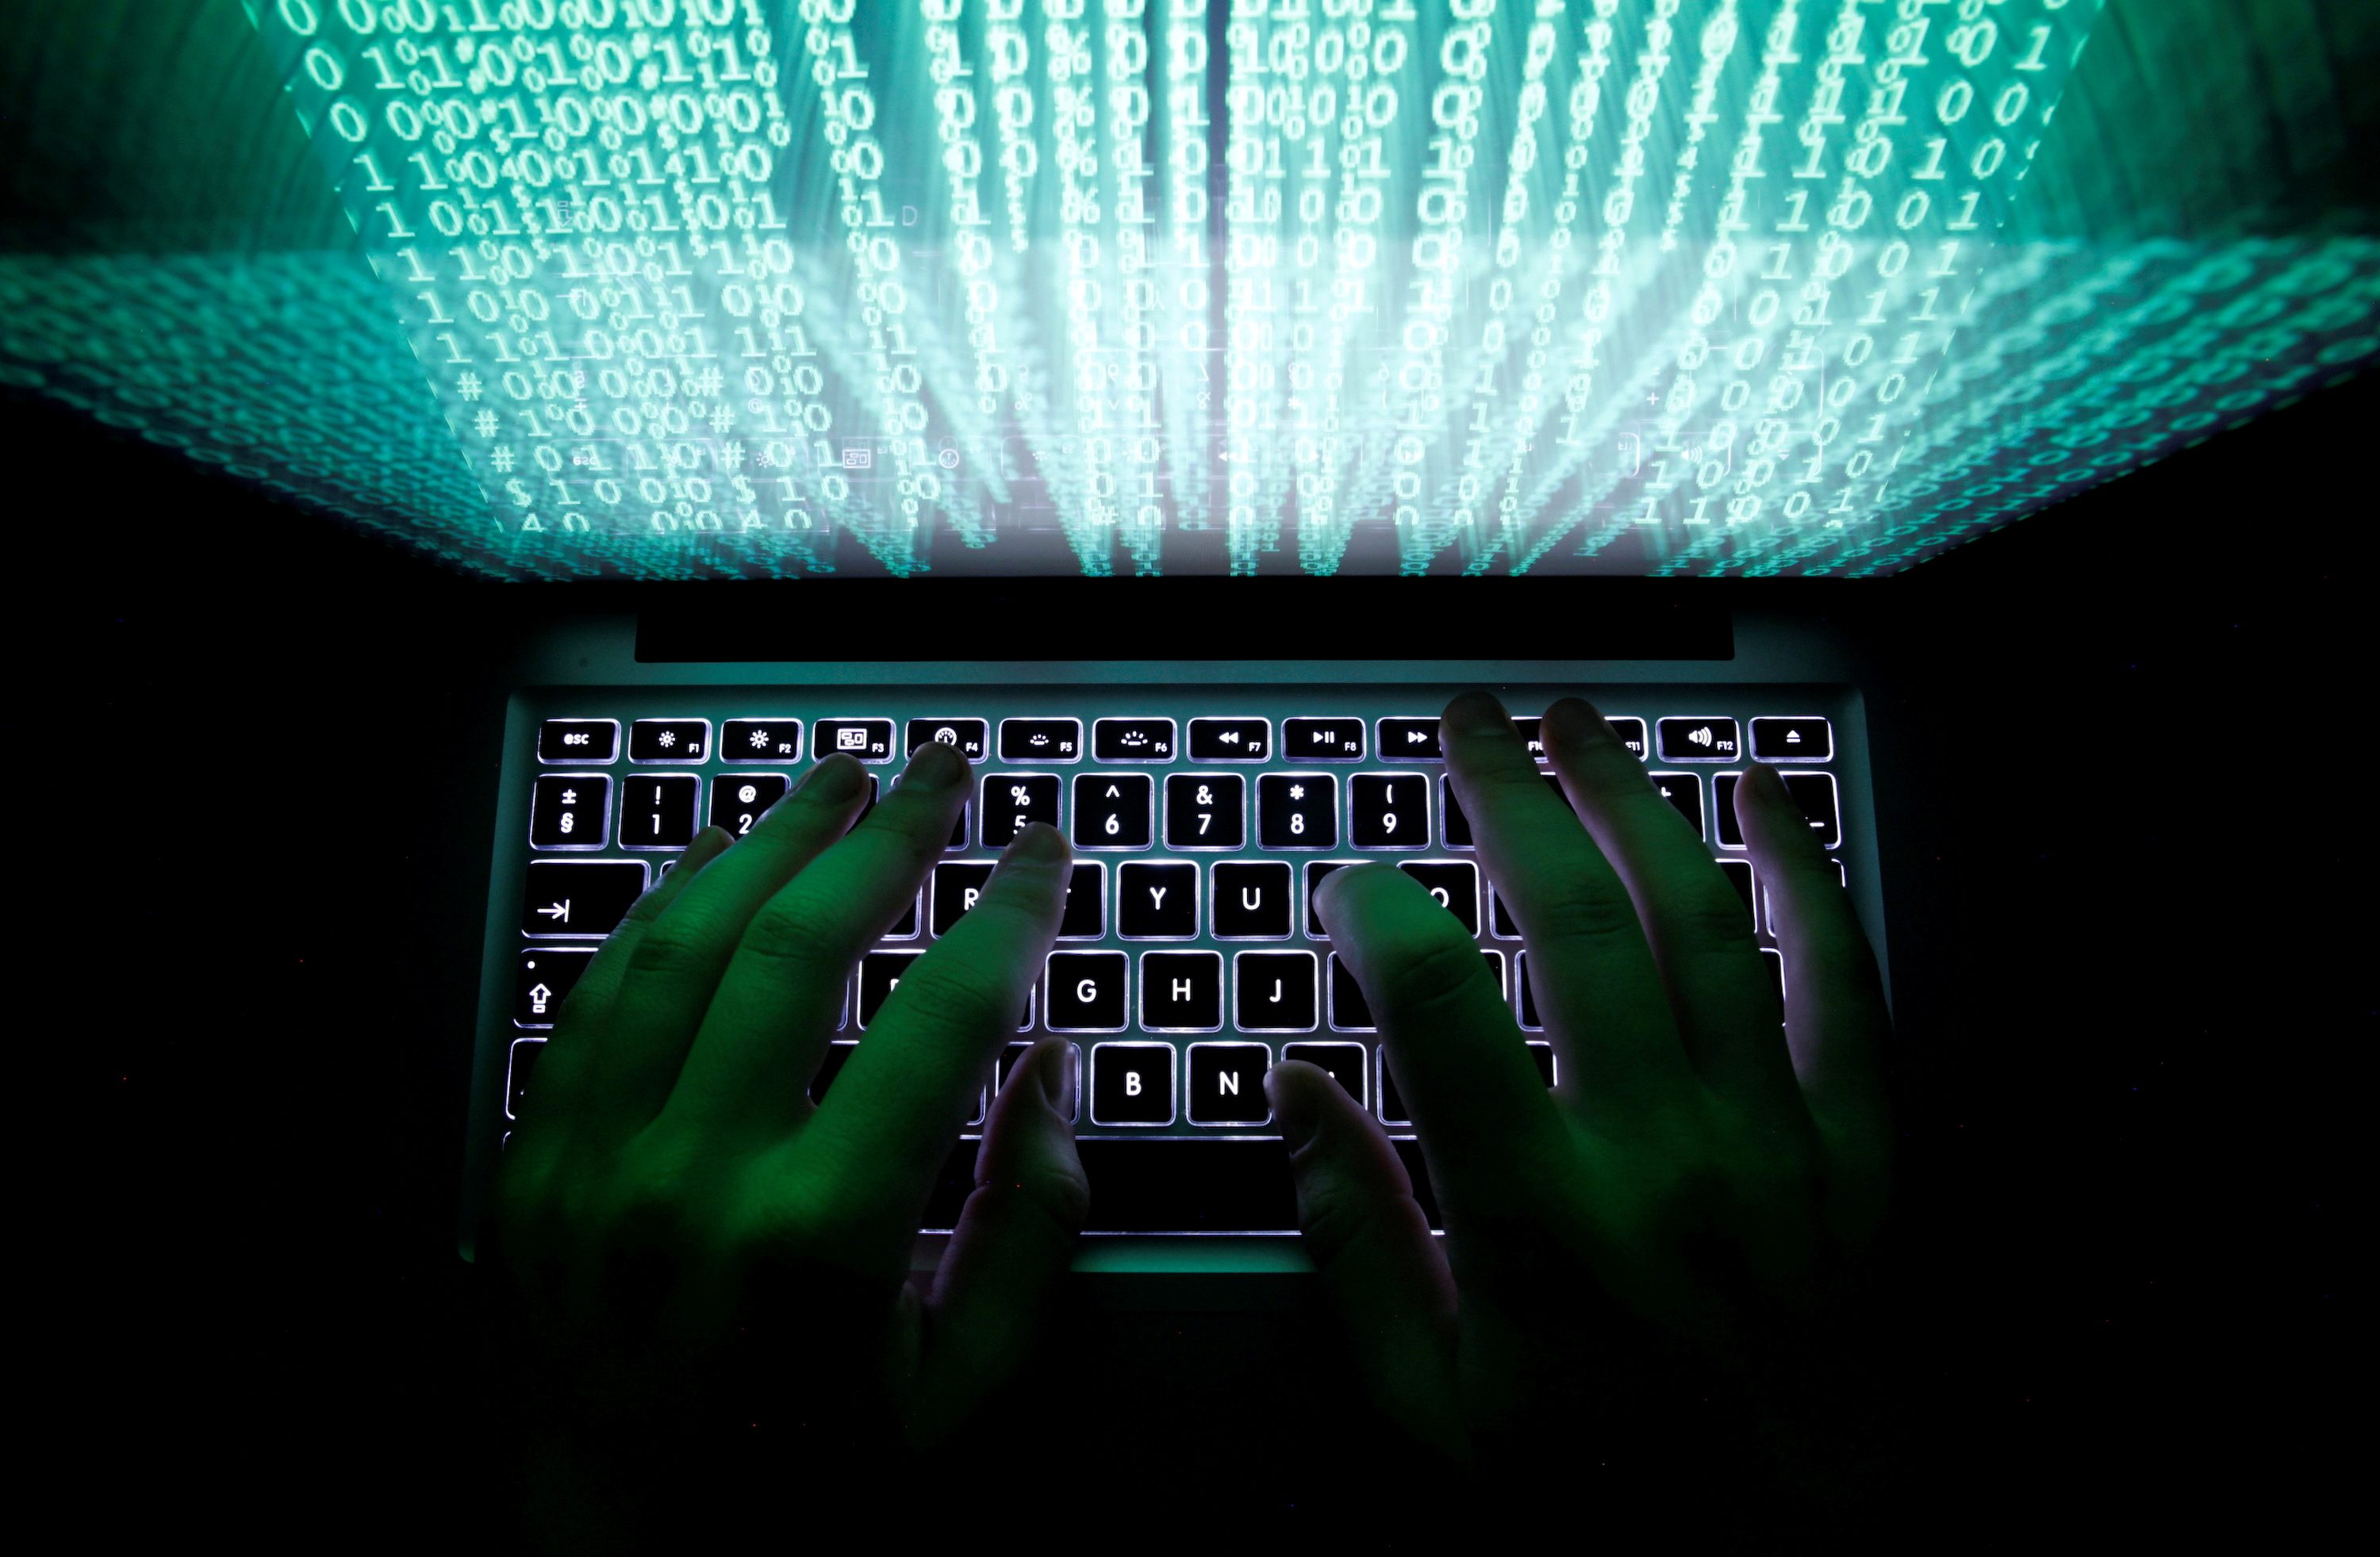 Davao-based hacker linked to group conducting DDoS attacks identified